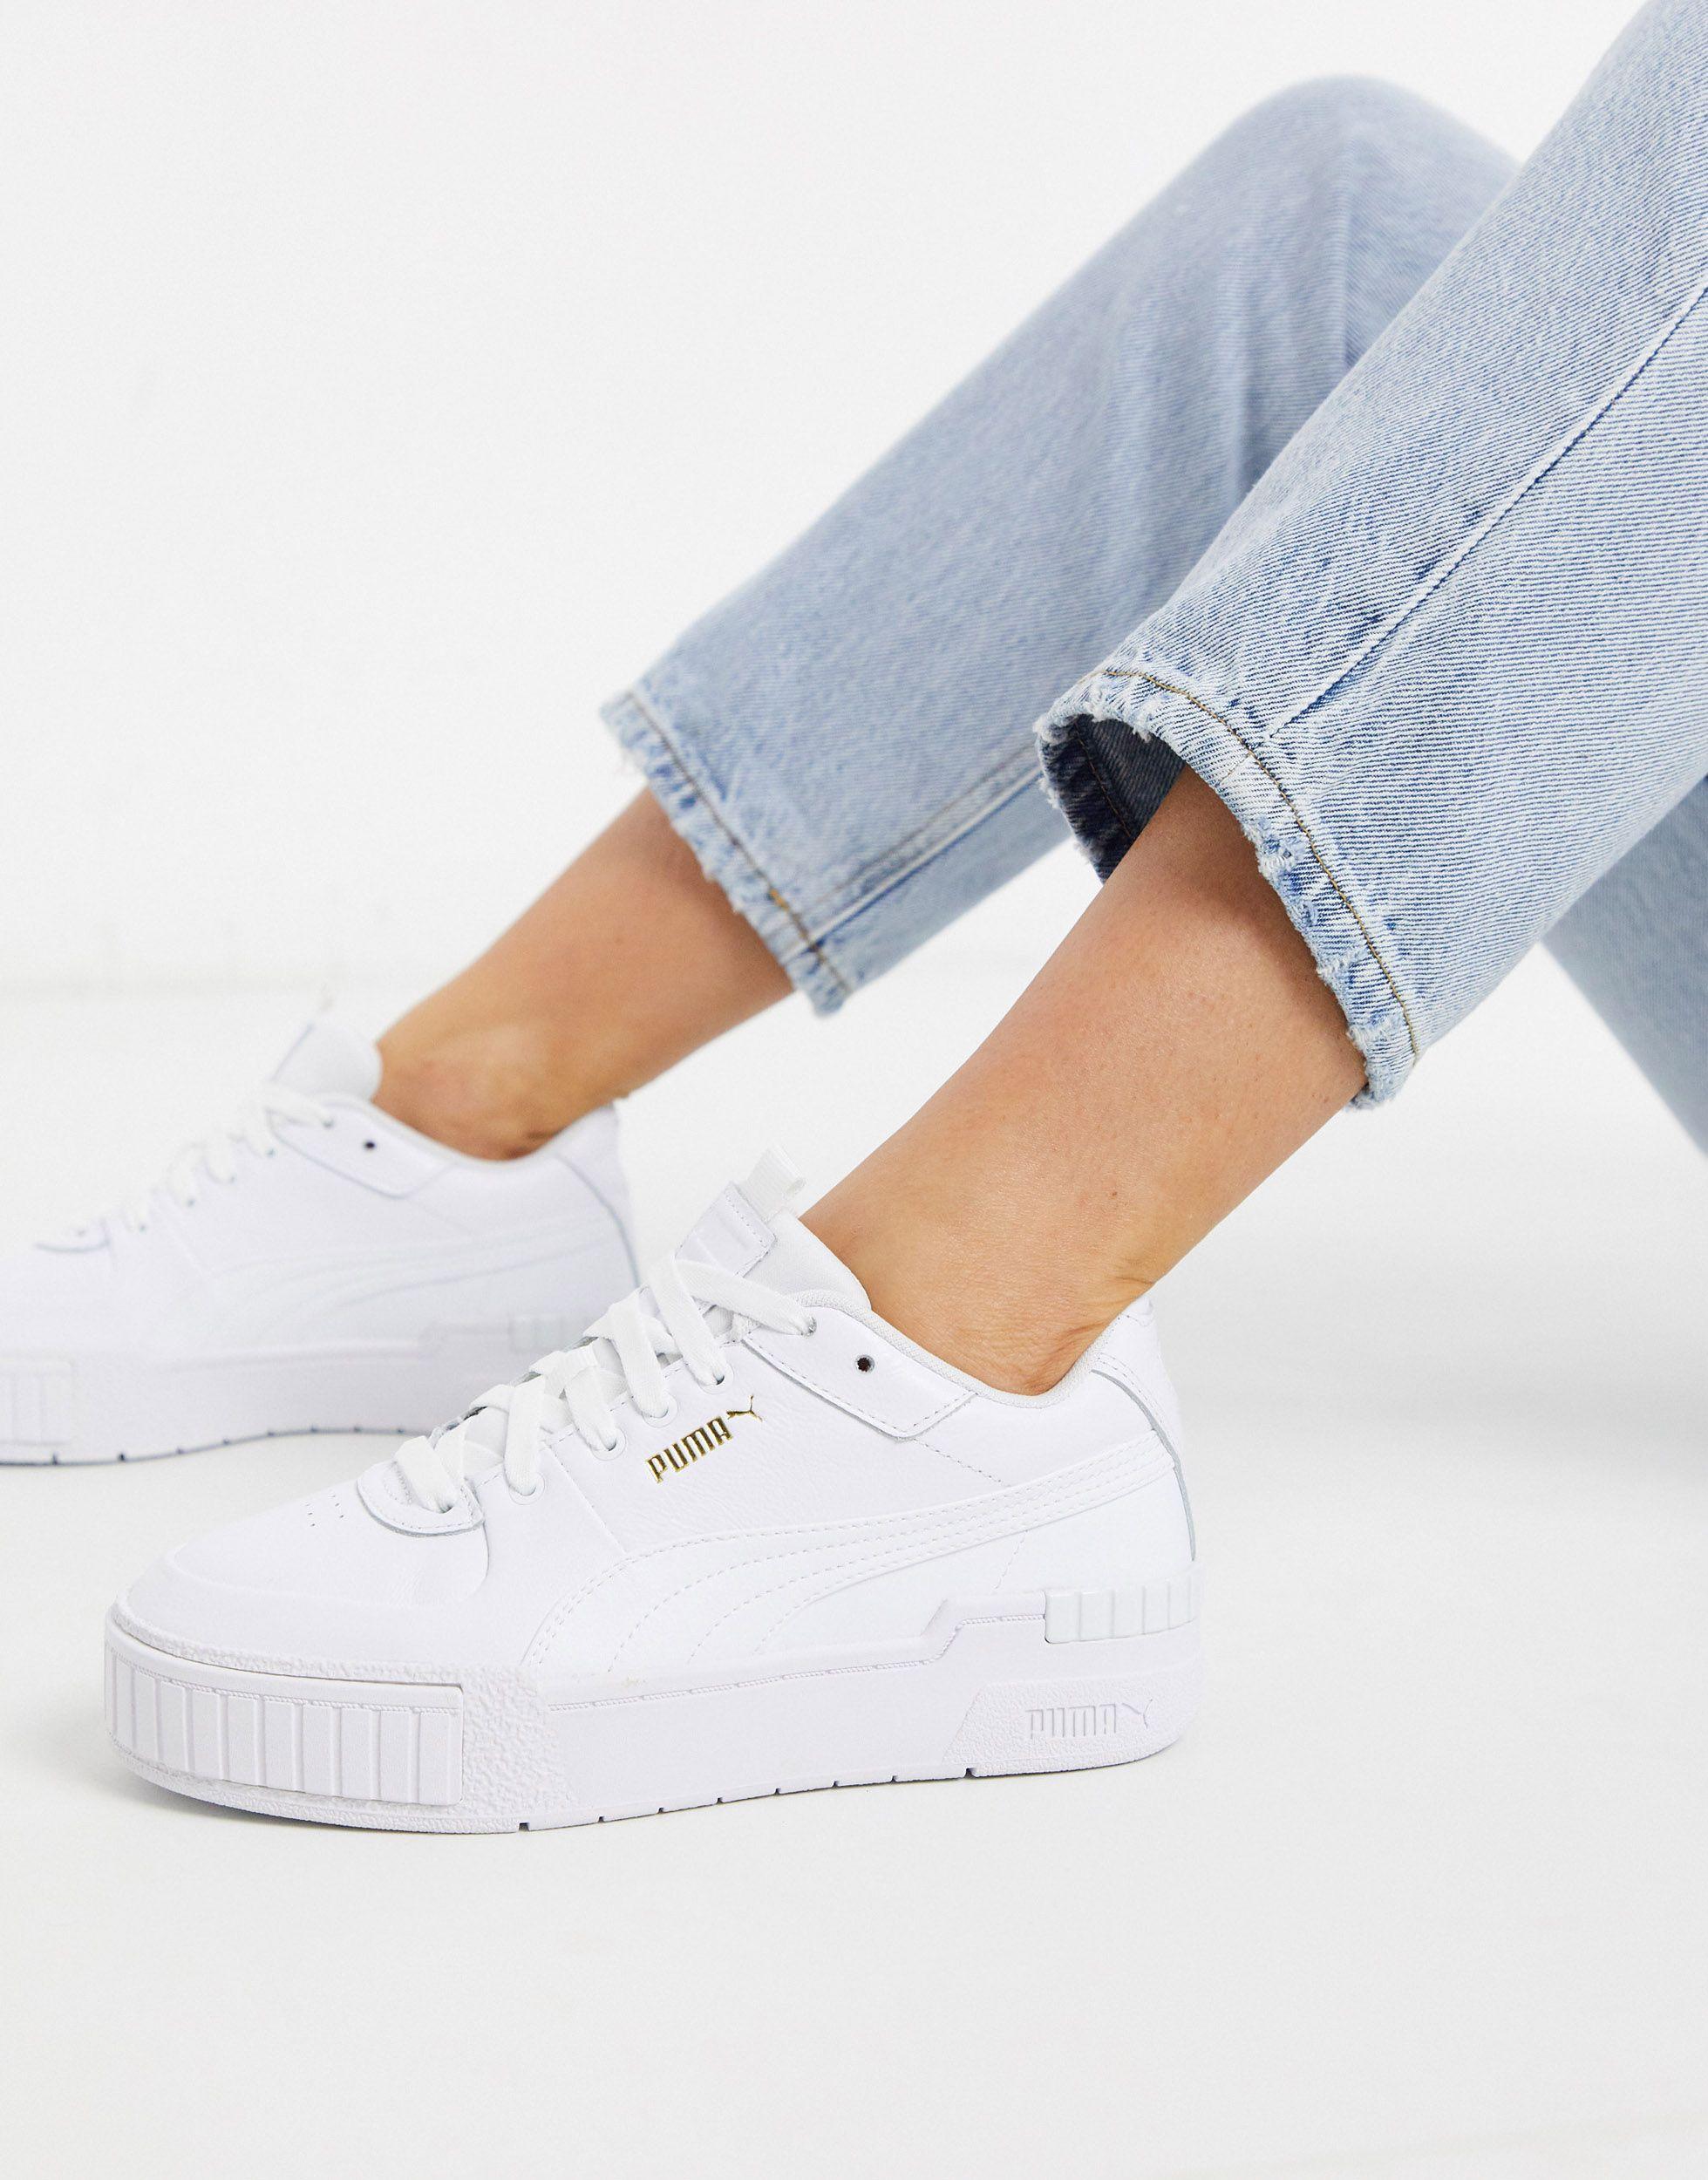 PUMA Leather Cali Sport Chunky Sneakers in White - Lyst